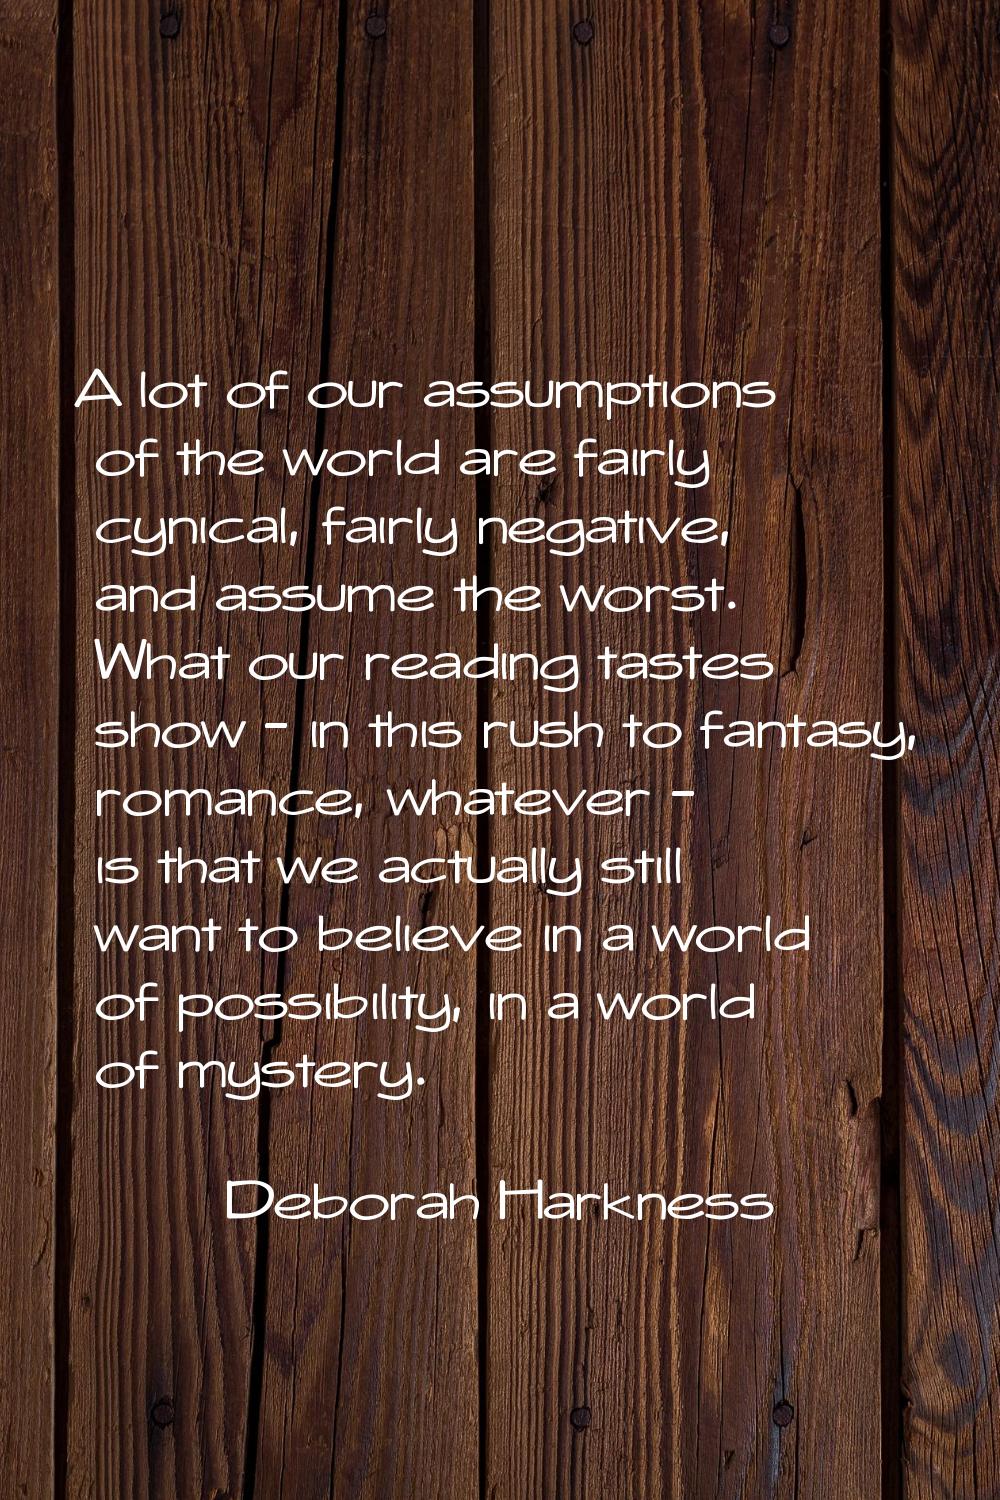 A lot of our assumptions of the world are fairly cynical, fairly negative, and assume the worst. Wh